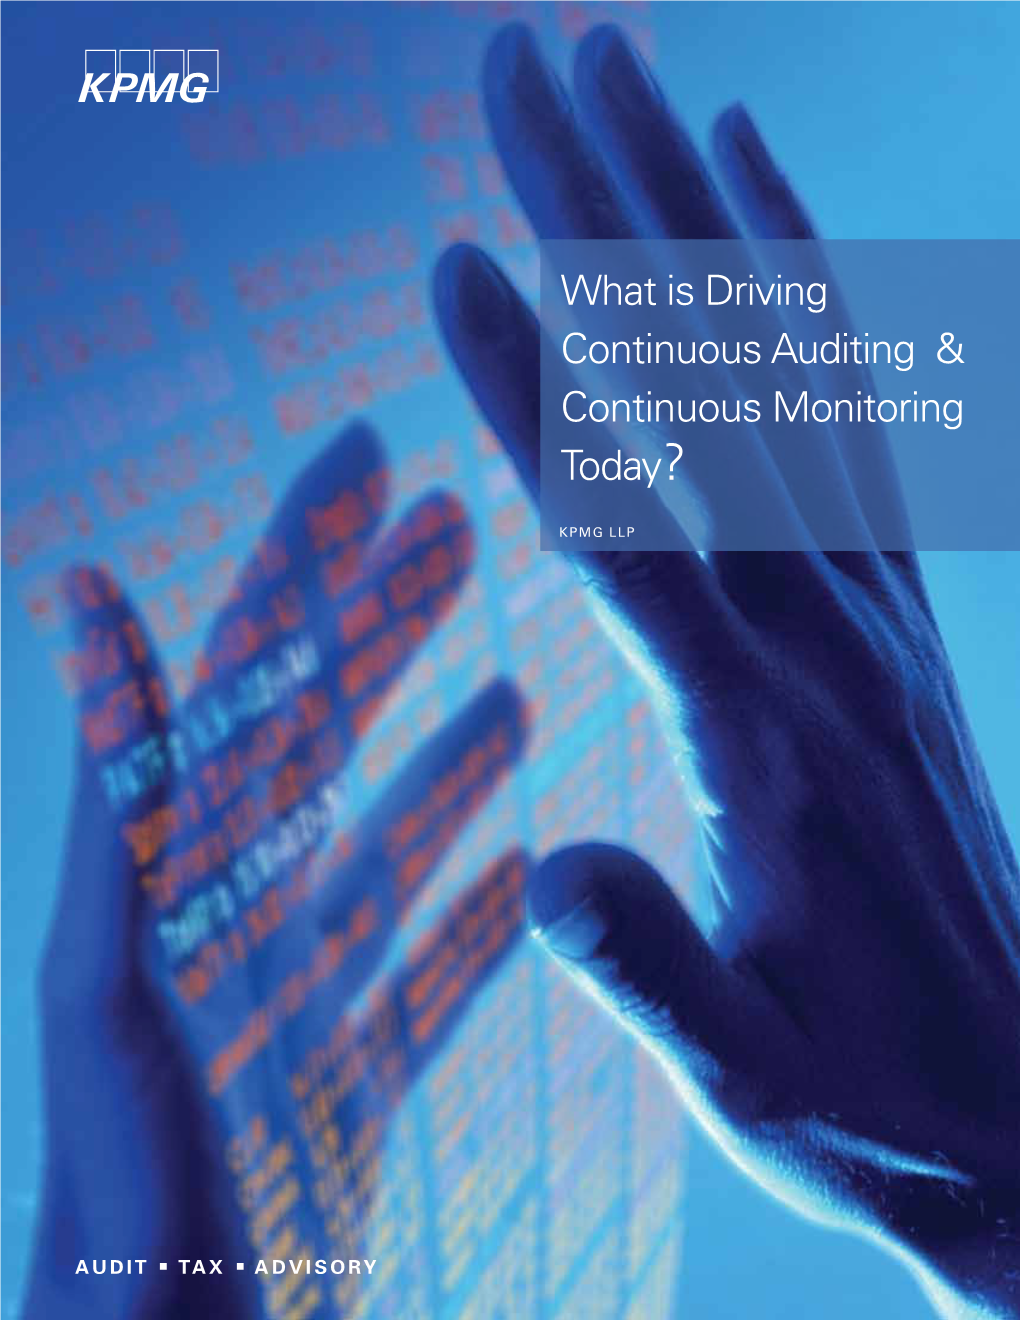 What Is Driving Continuous Auditing/Continuous Monitoring Today?